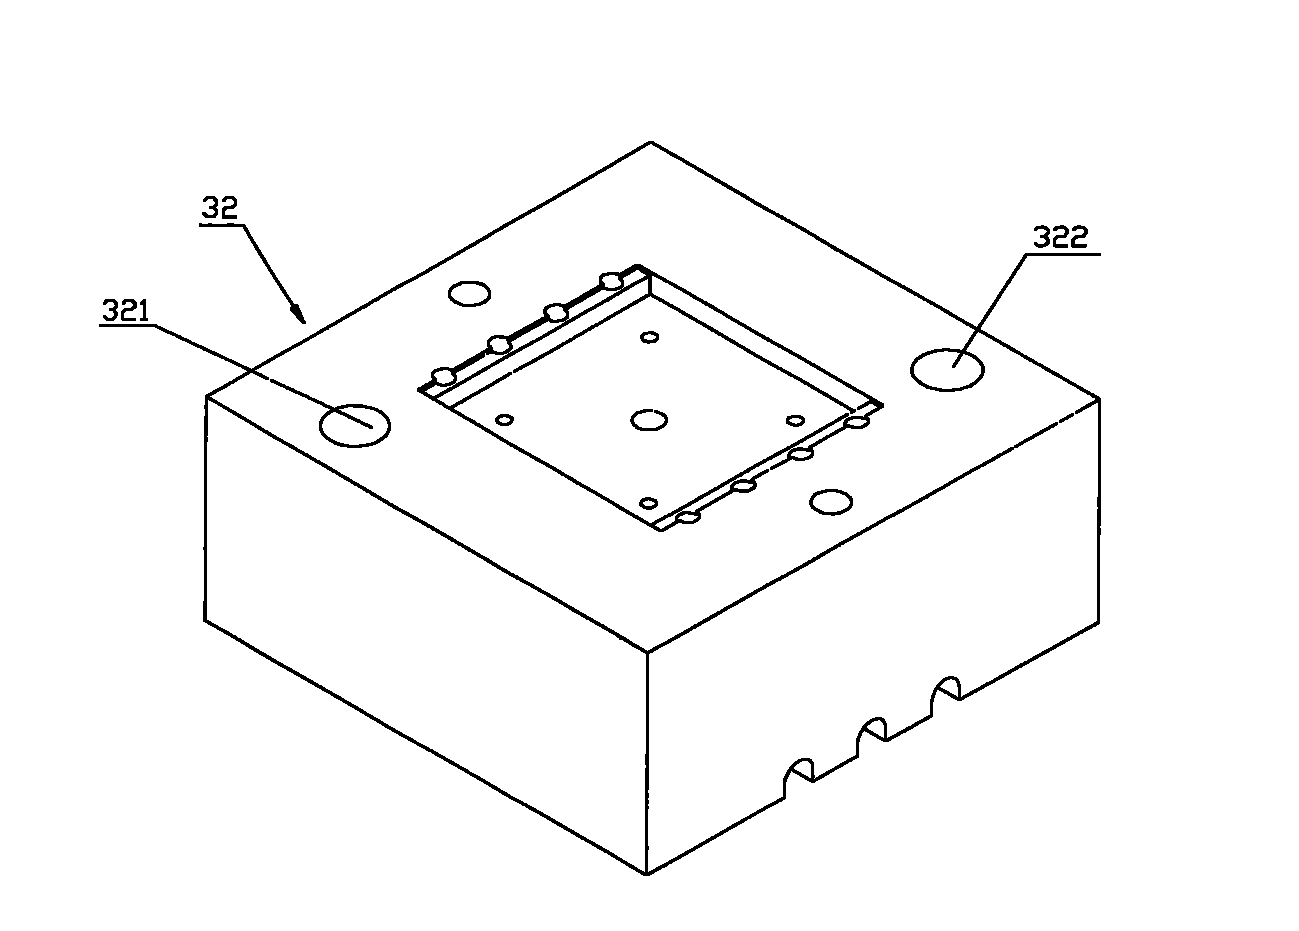 System and method for testing performance of large-area flat-plate SOFC single battery